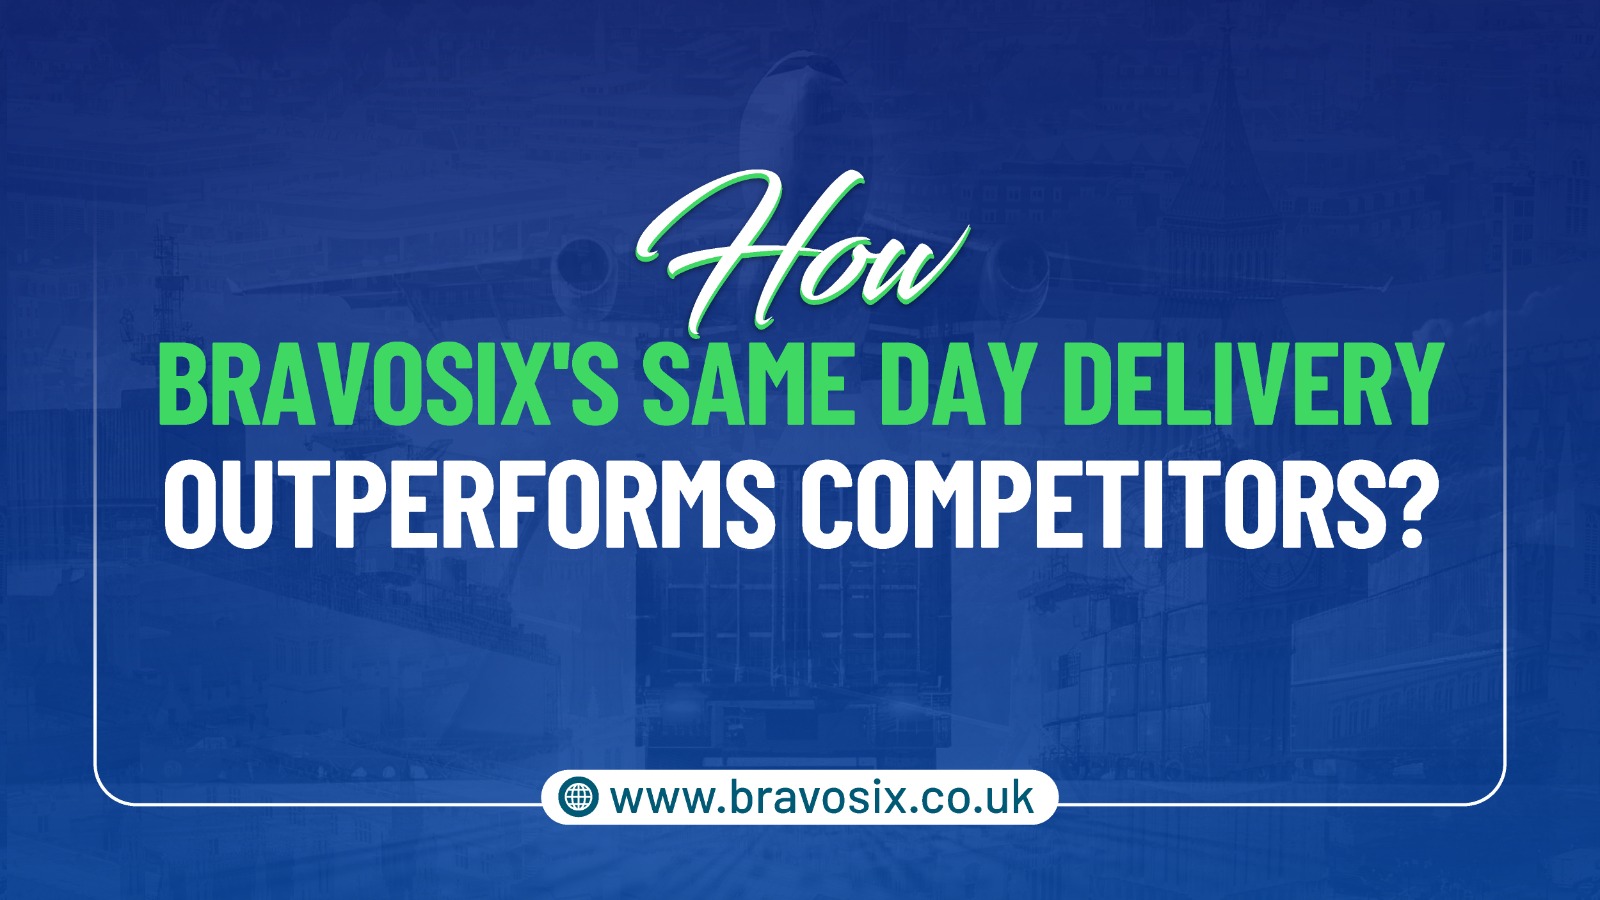 How Does Bravosix Same-Day Delivery Outperform Competitors